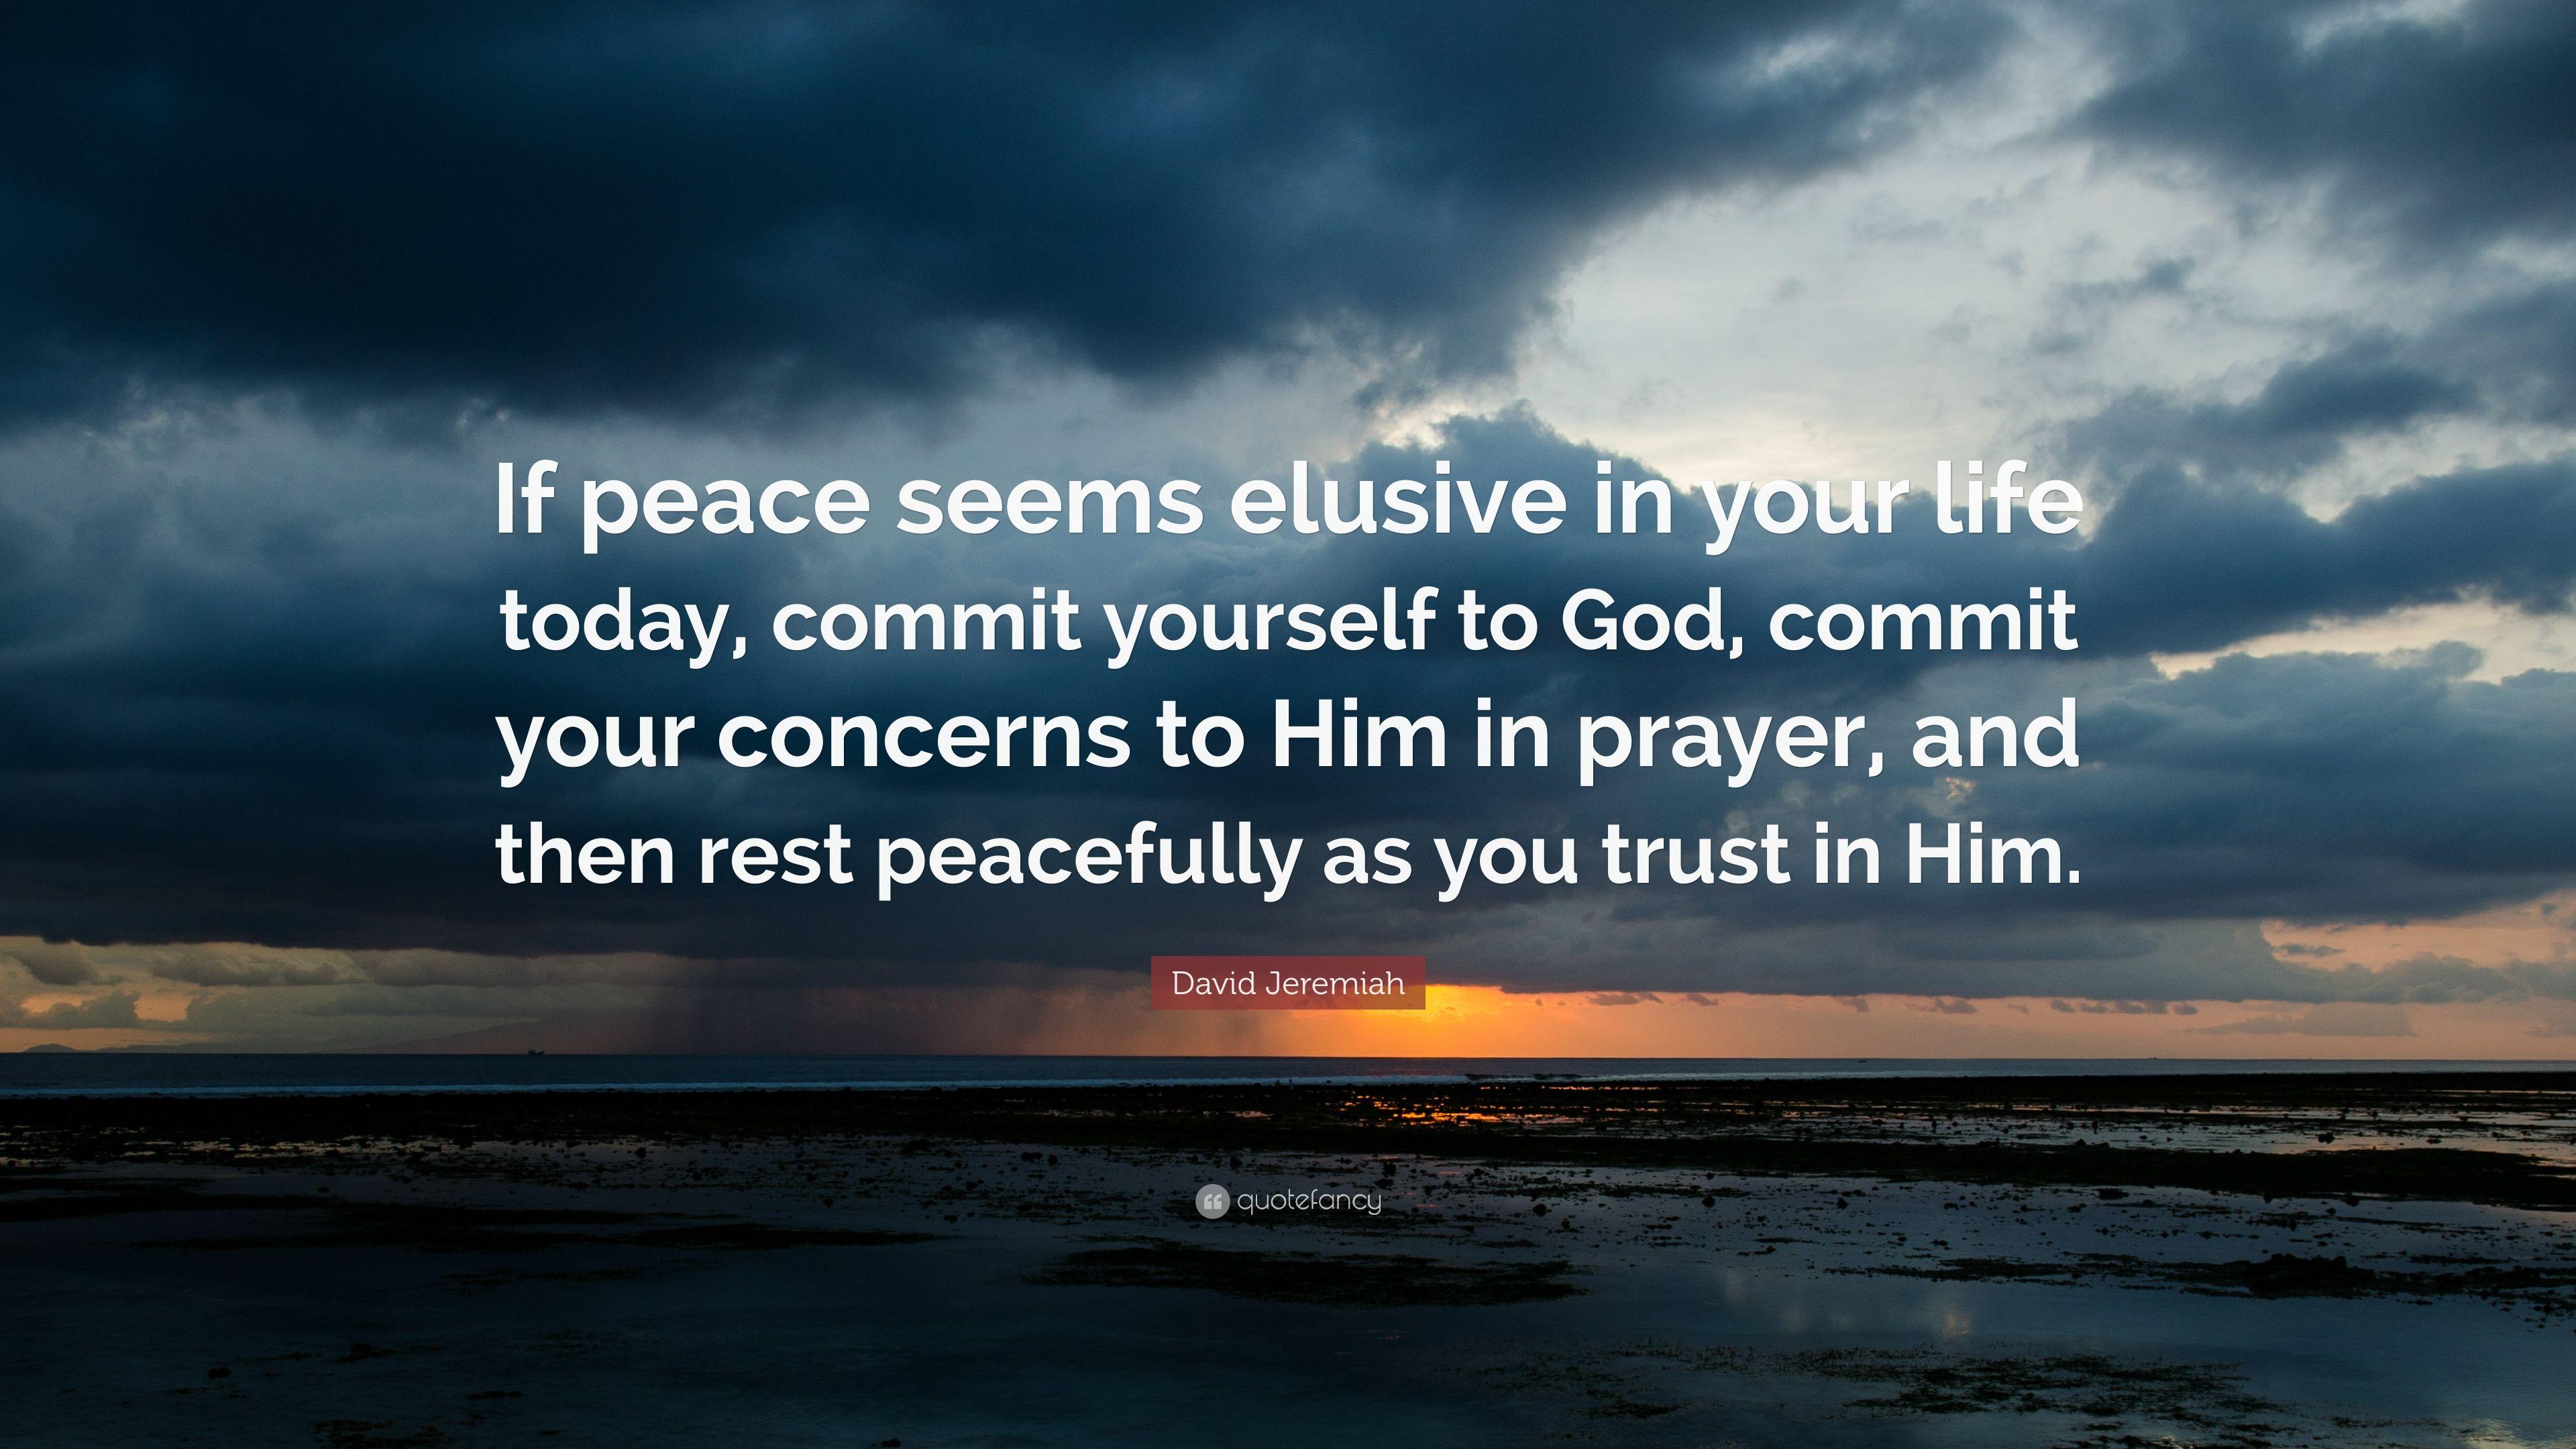 David Jeremiah Quote: “If peace seems elusive in your life today